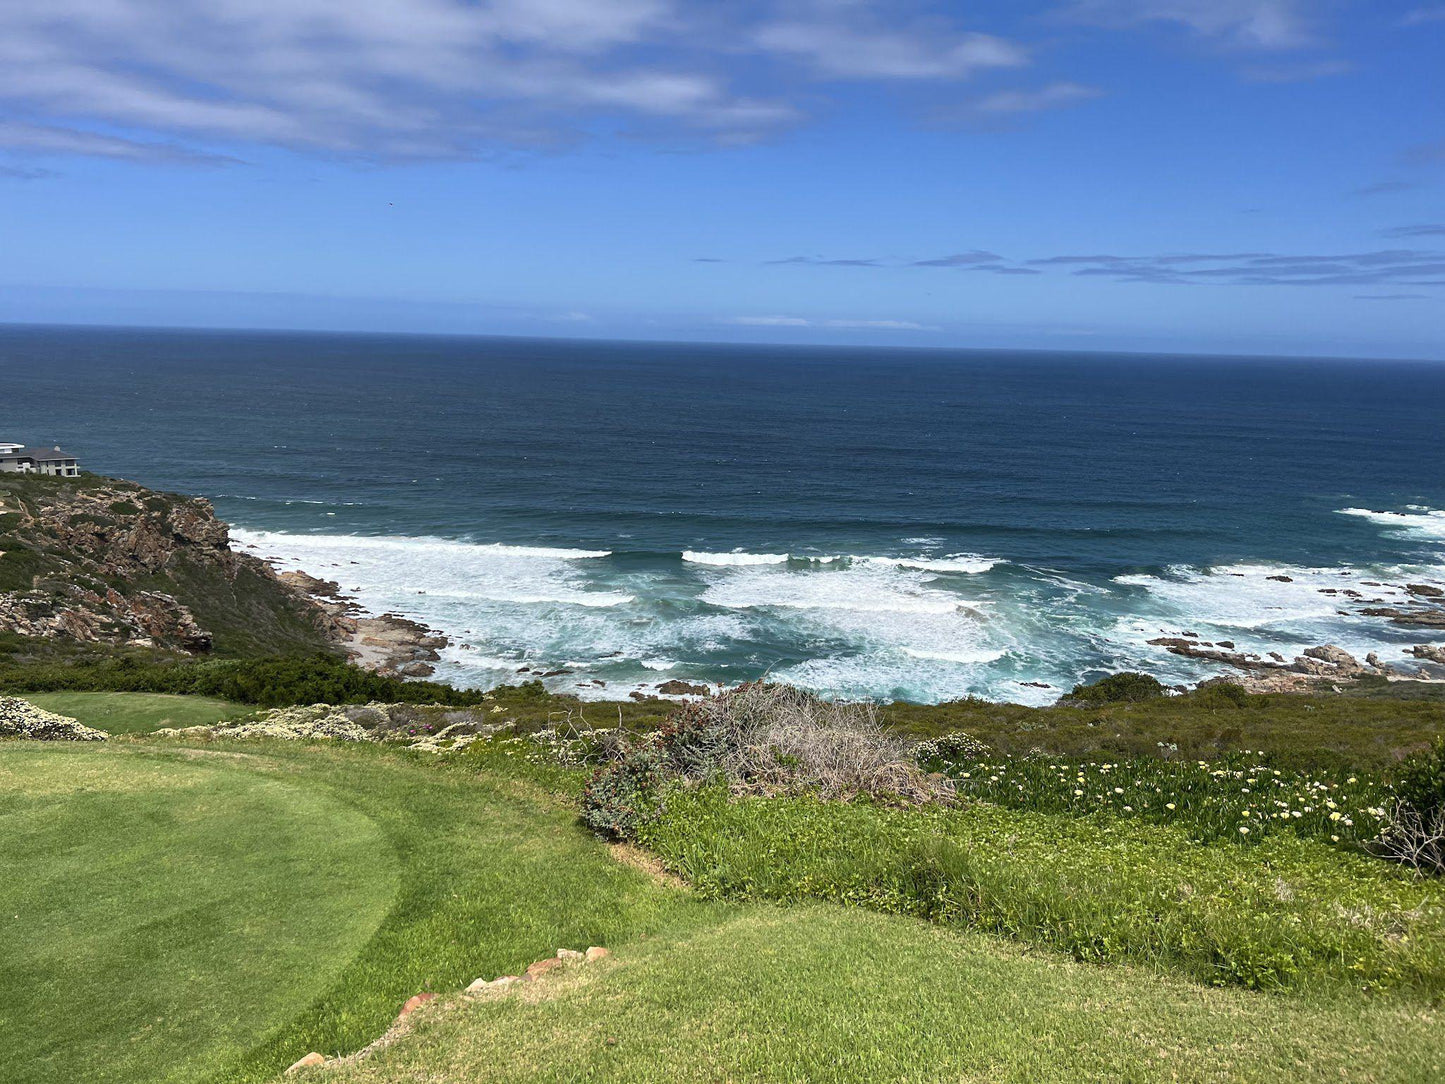 Nature, Complementary Colors, Ball Game, Sport, Golfing, Beach, Sand, Ocean, Waters, Wave, Cliff, Pinnacle Point Golf Practice Range, 194 Mossel St, D`Almeida, Mossel Bay, 6506